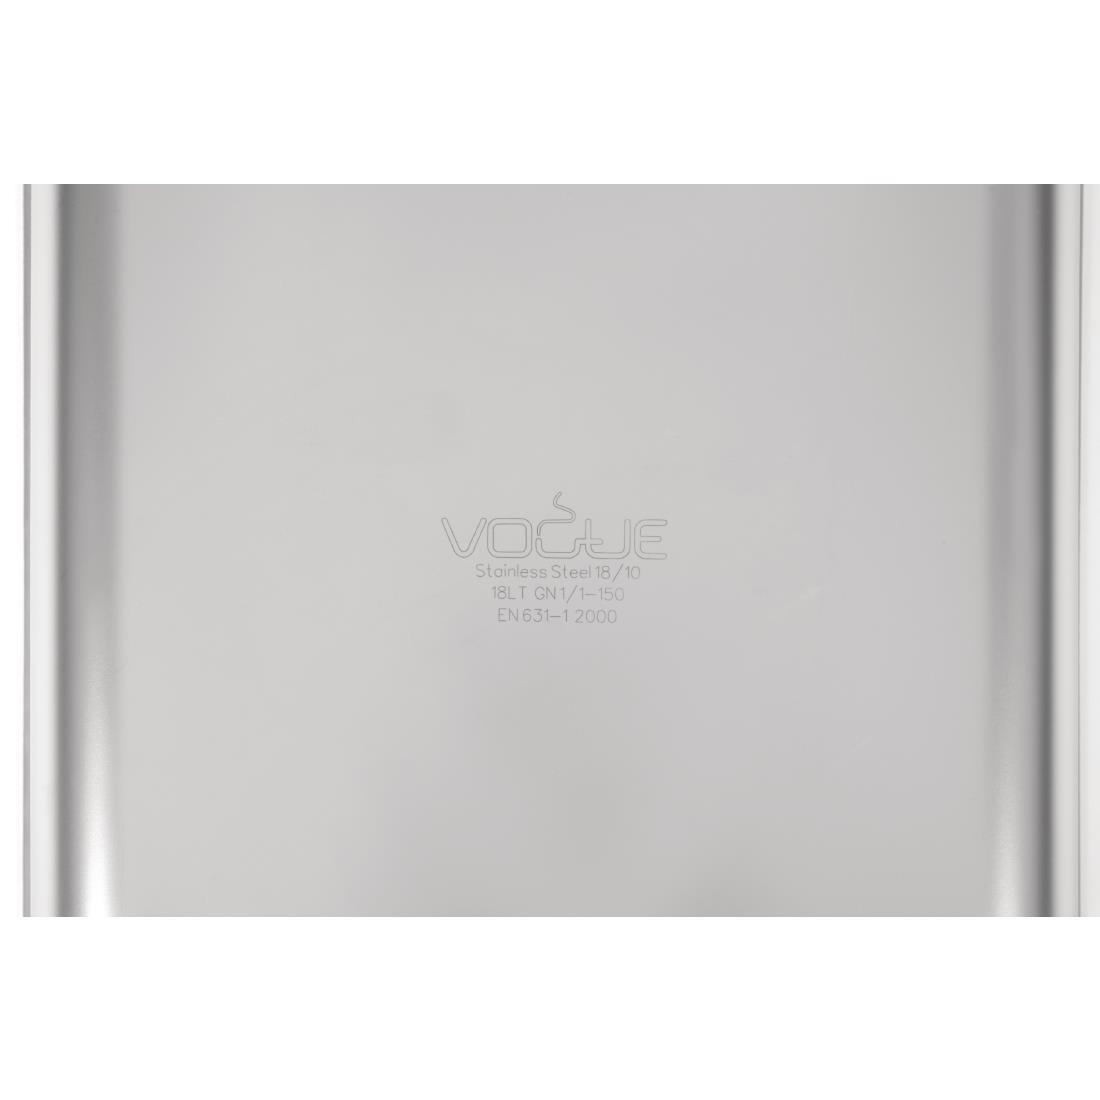 Vogue Heavy Duty Stainless Steel 1/1 Gastronorm Pan 150mm - DW435  - 6